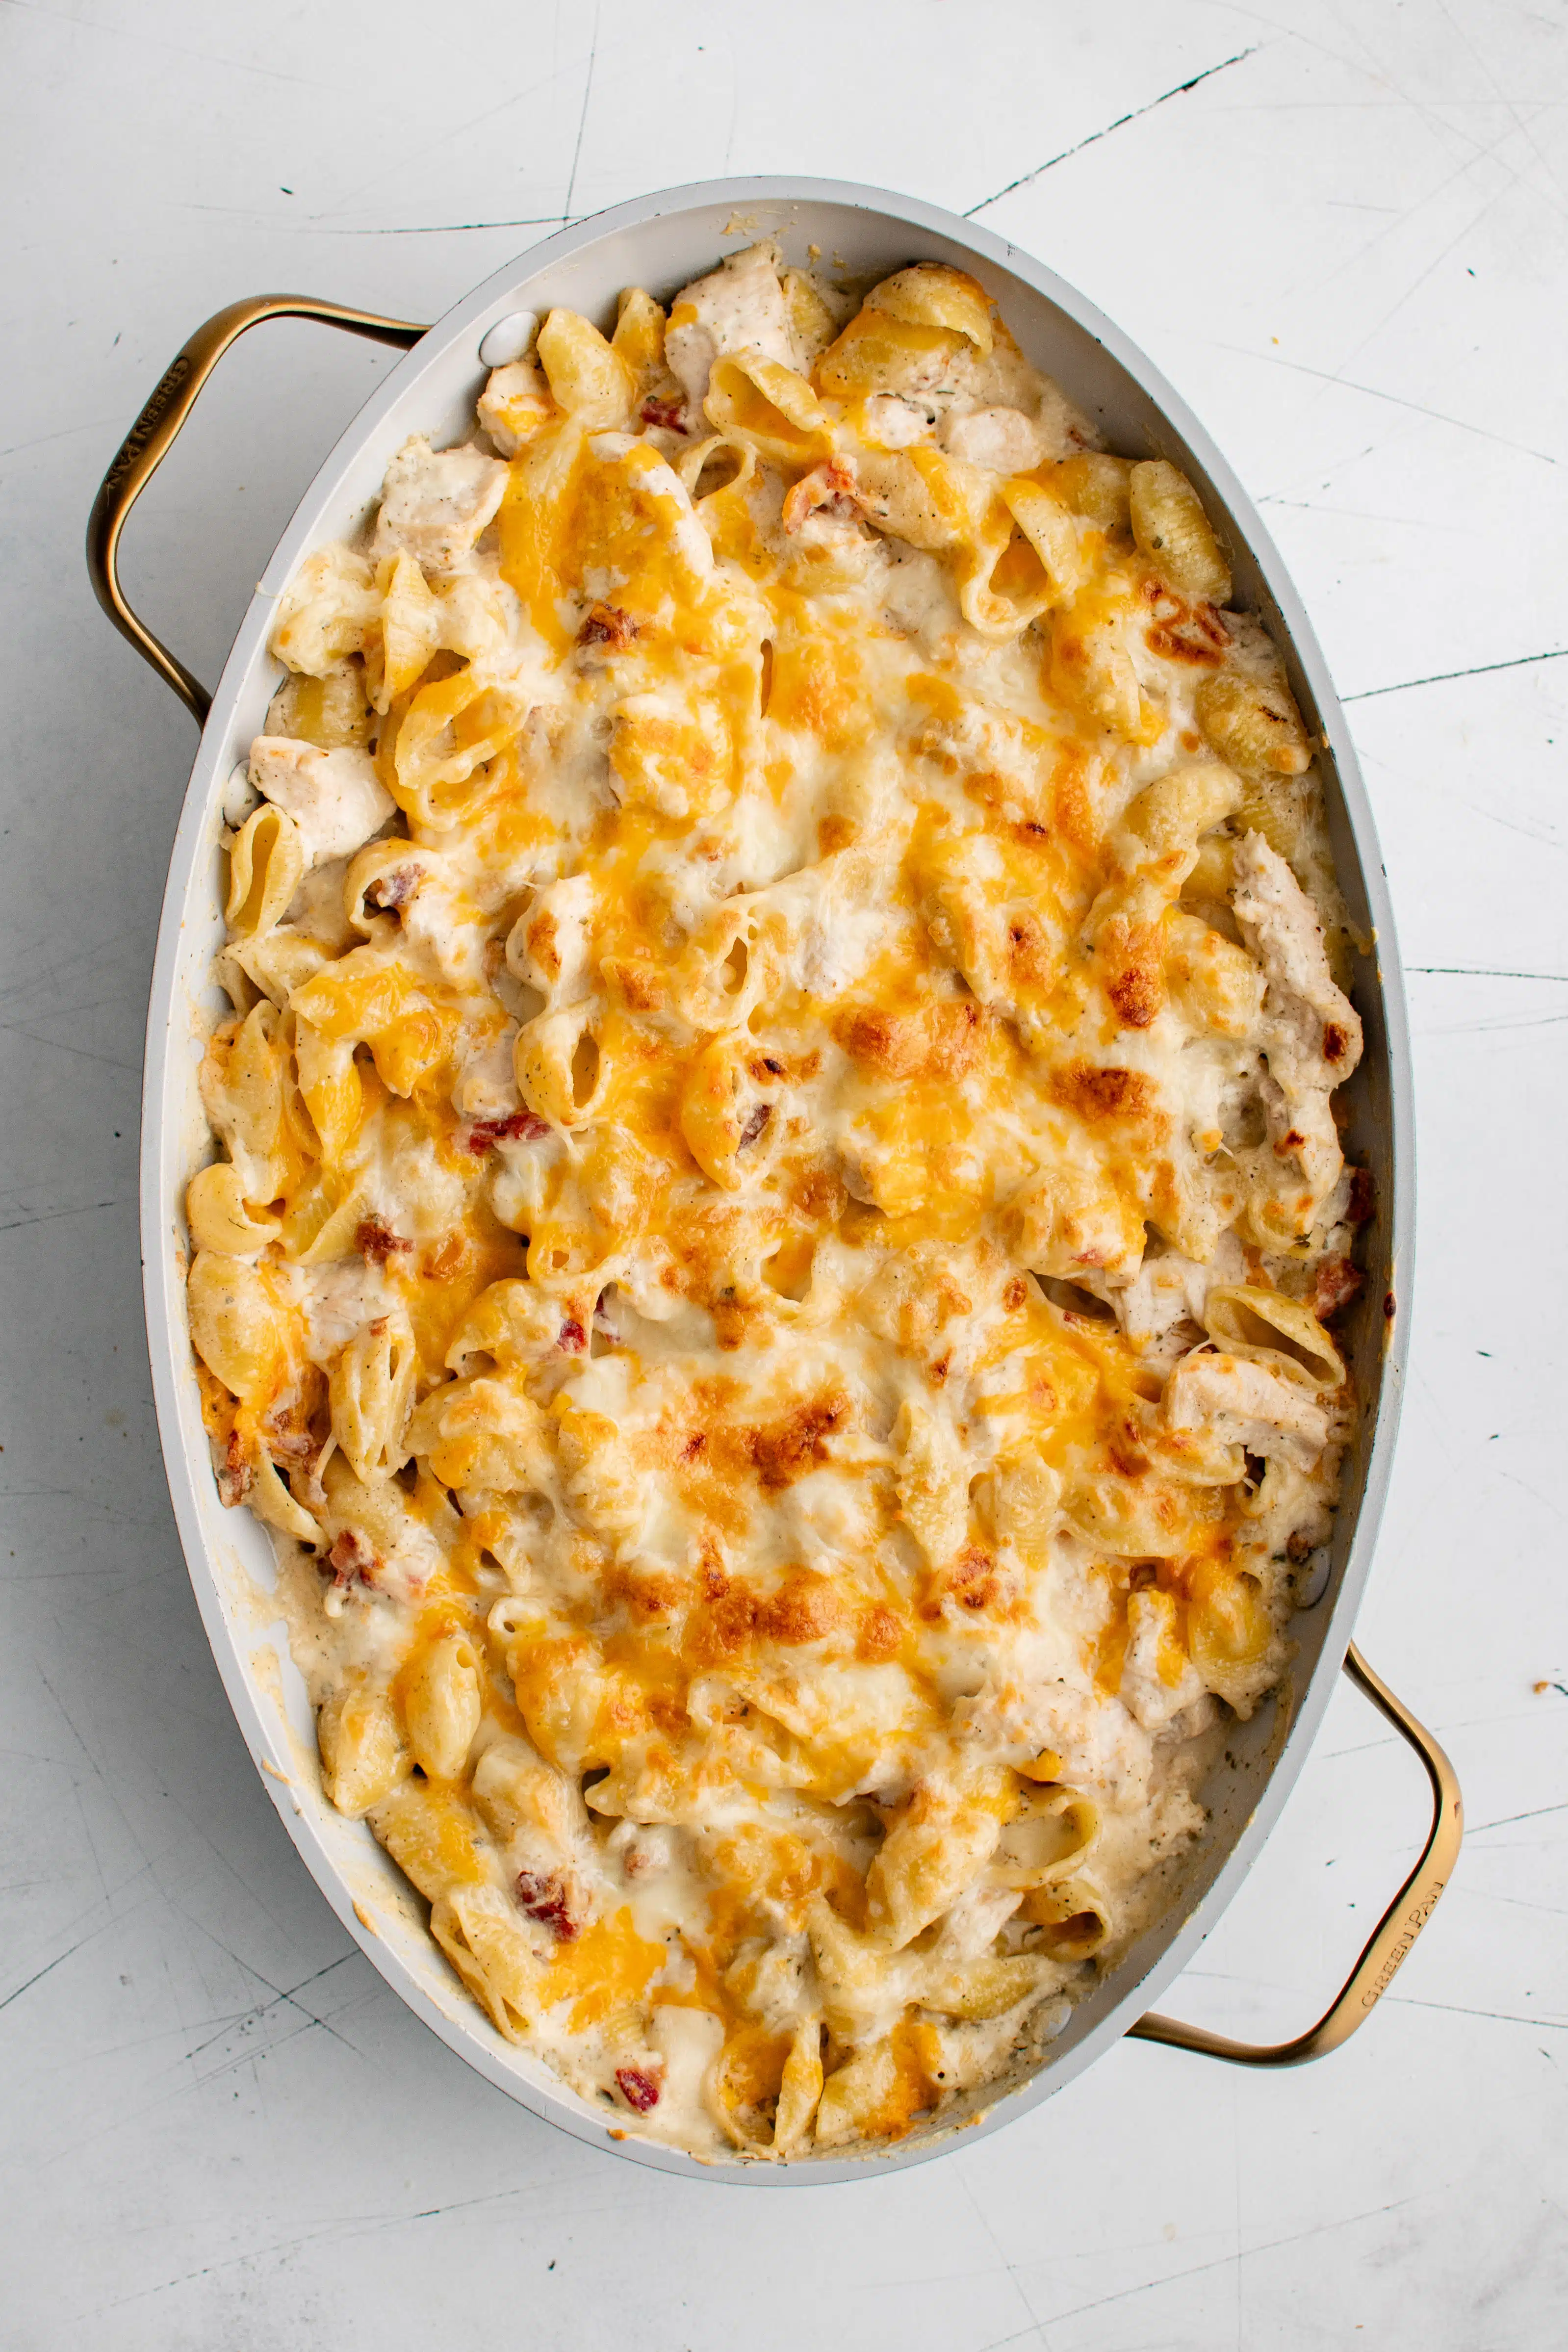 Baked crack chicken with golden gooey melted cheese on top in a large oval baking dish.